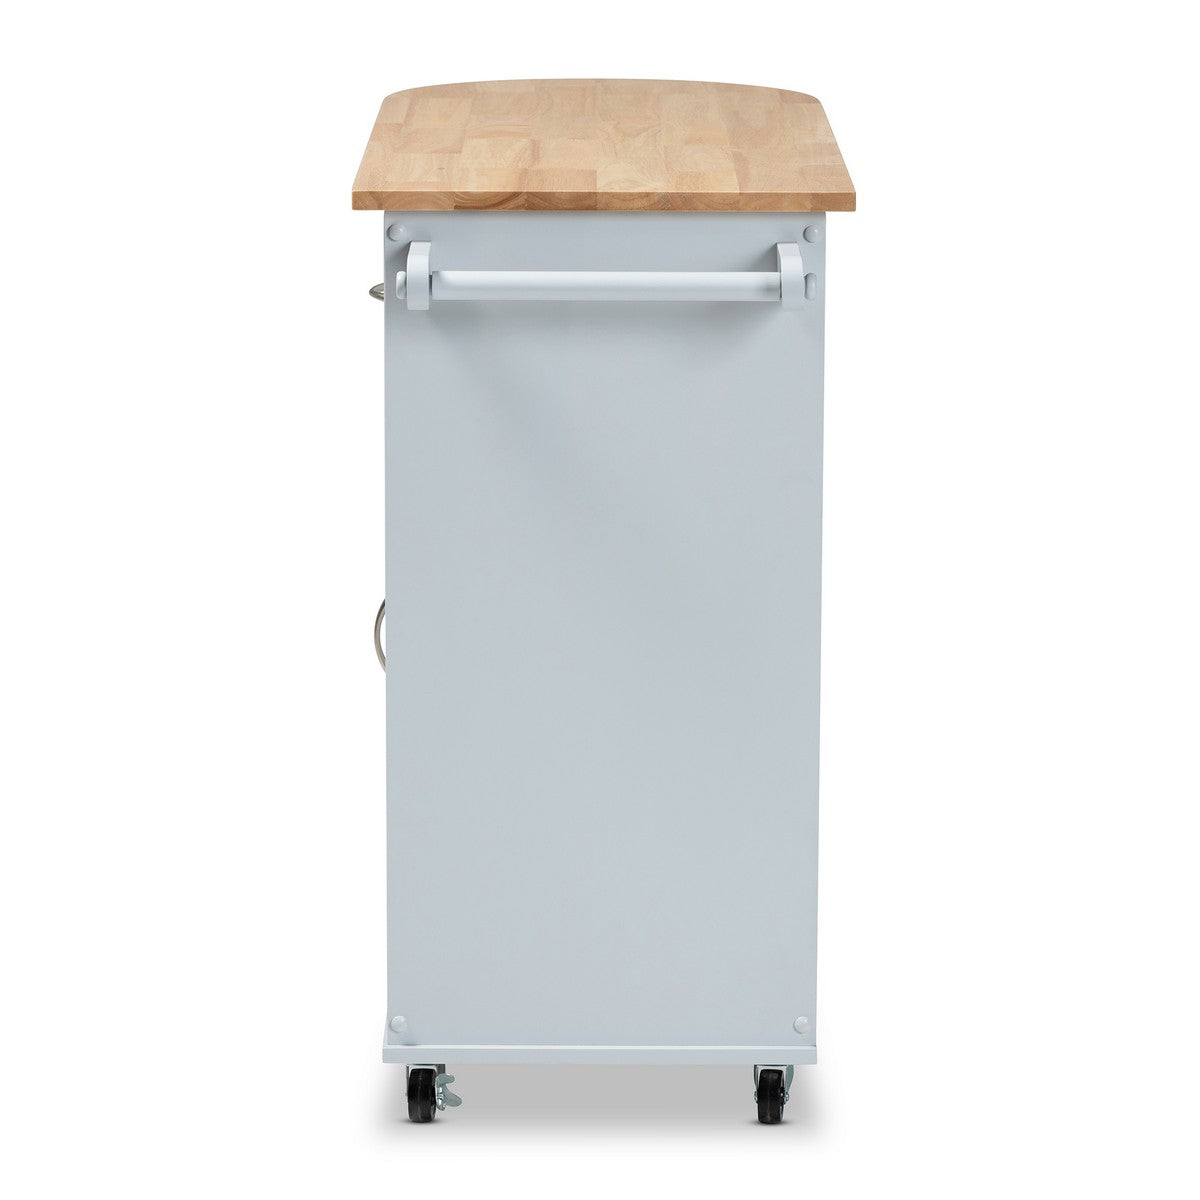 Baxton Studio Donnie Coastal and Farmhouse Two-Tone Light Grey and Natural Finished Wood Kitchen Storage Cart